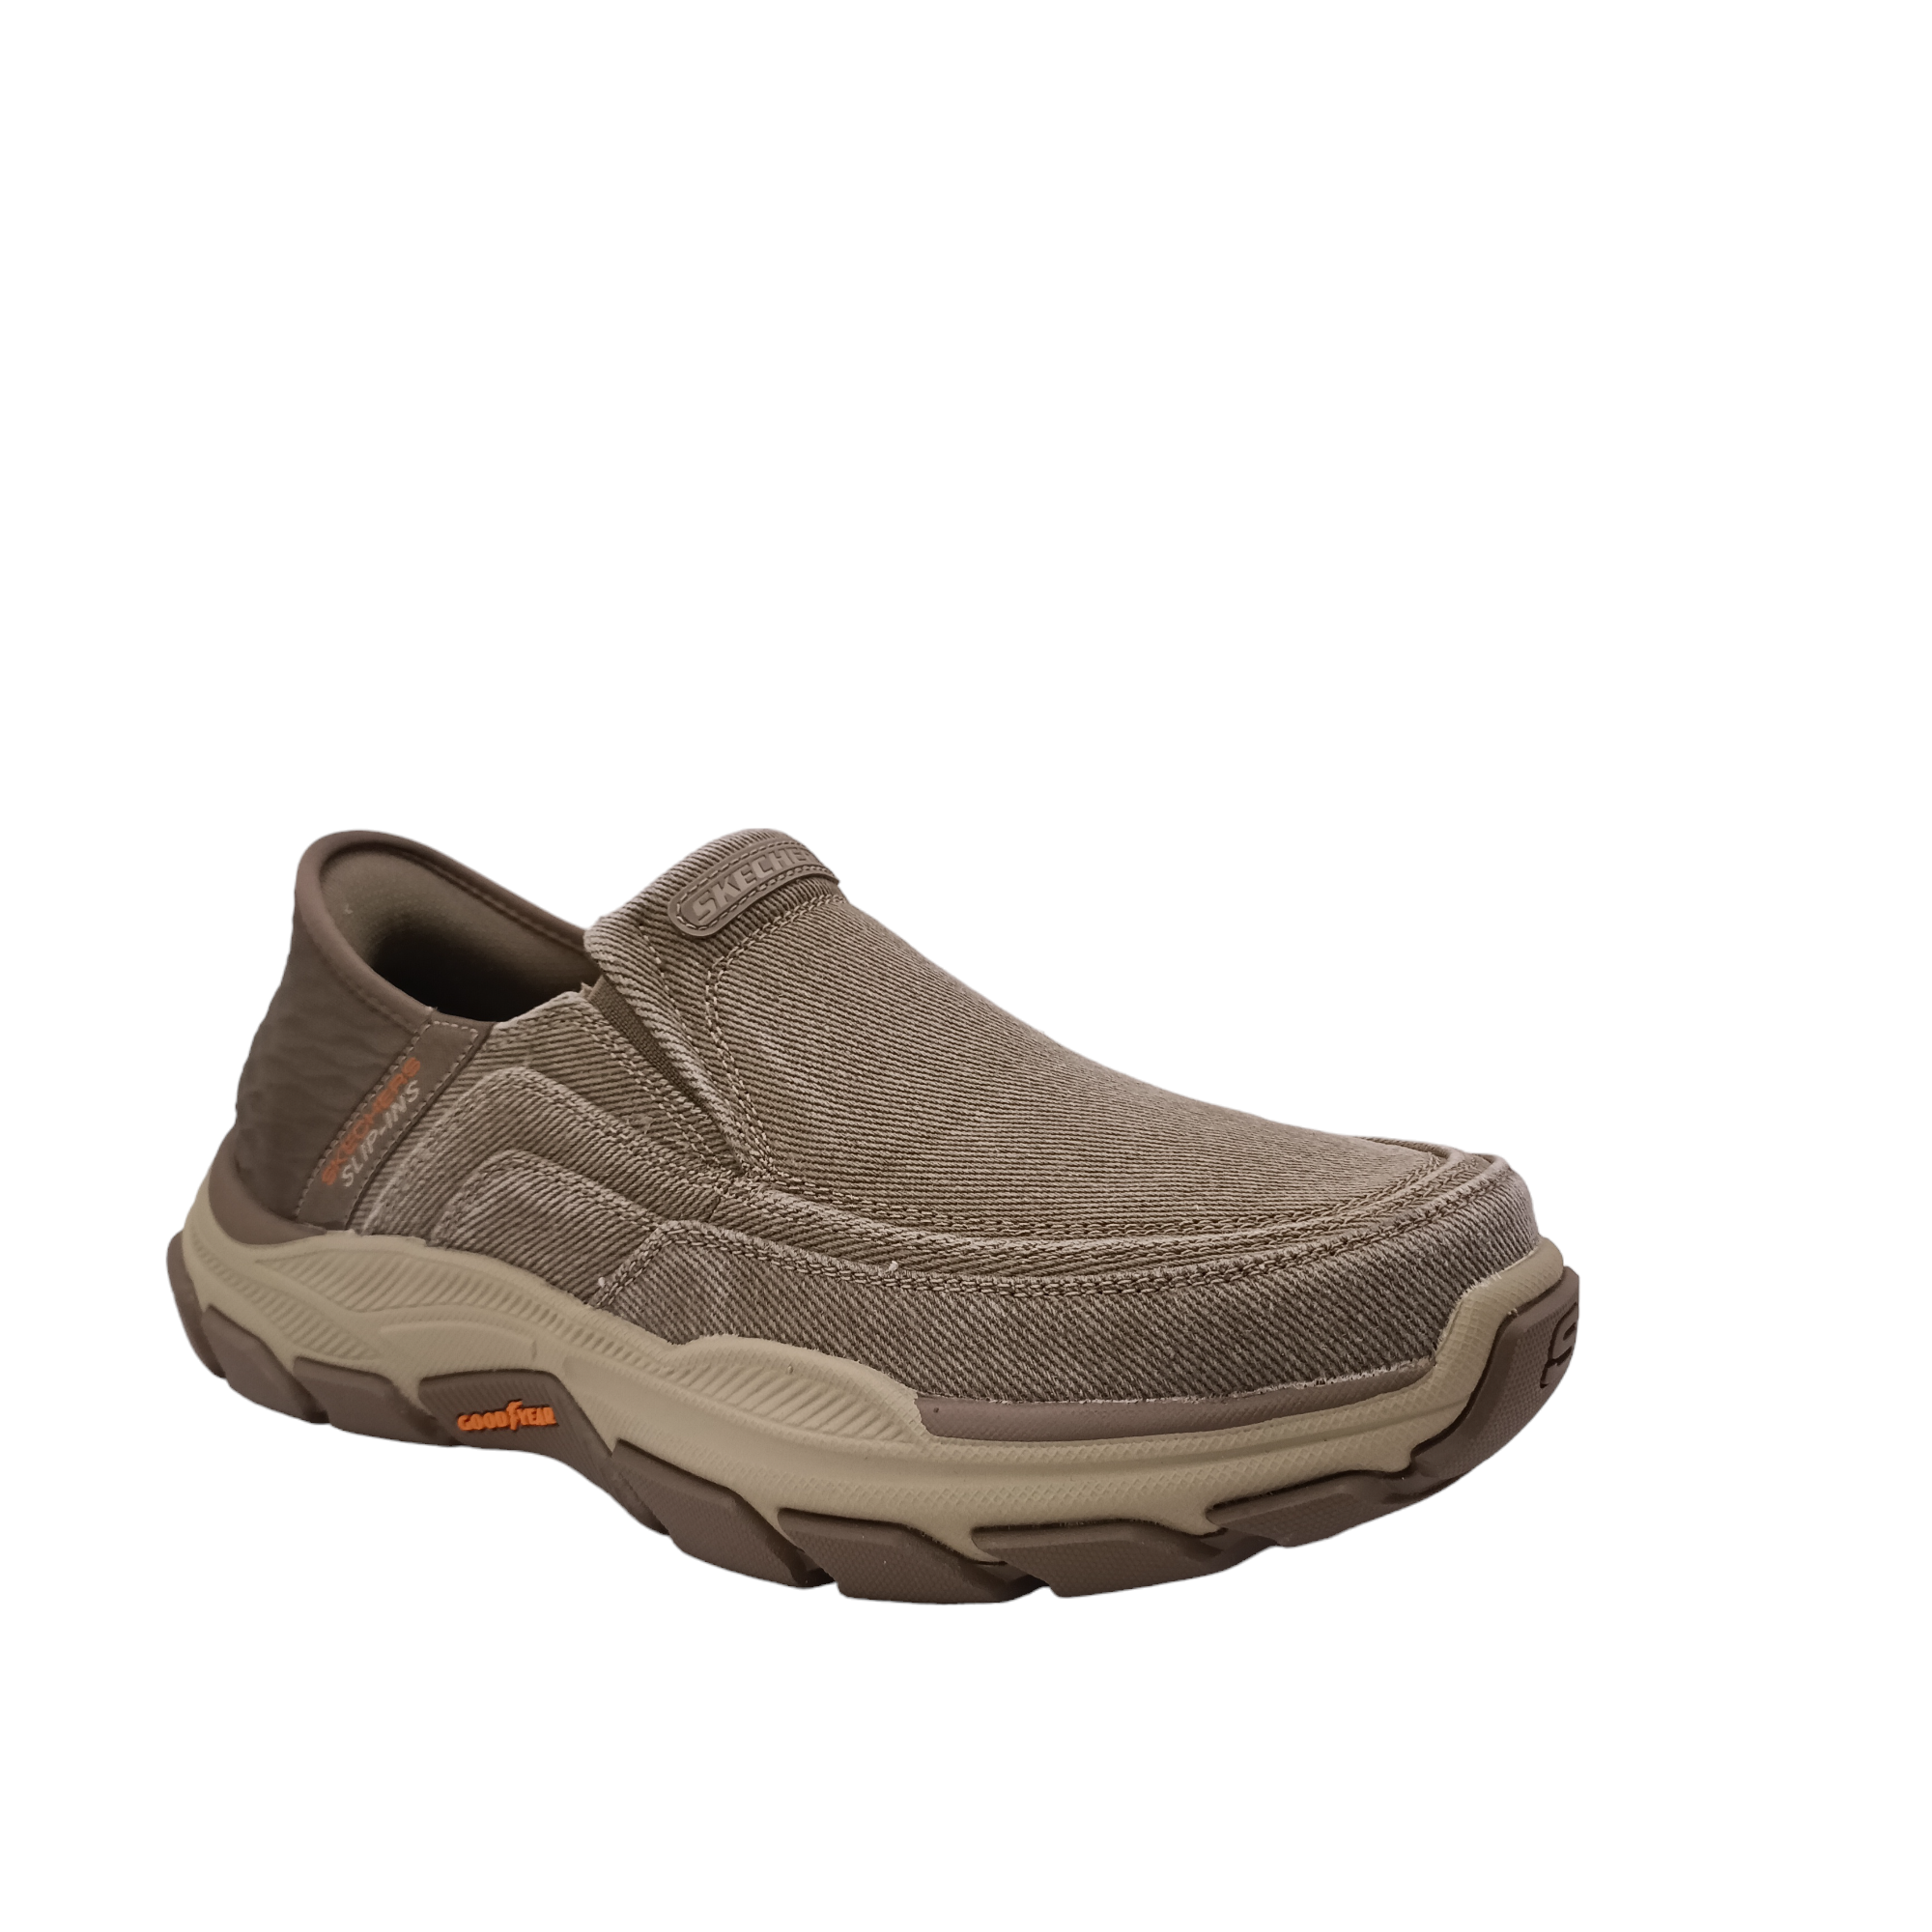 Holmgren from Skechers. Side angled view of shoe with slip-in technology on the heel, a firm and cushioned heel for easy entry without hands. Rugged looked sole with a synthetic upper with visible stitching. Wide fitting with two small external gussets. Shop Online and in-store with shoe&amp;me Mount Maunganui Tauranga